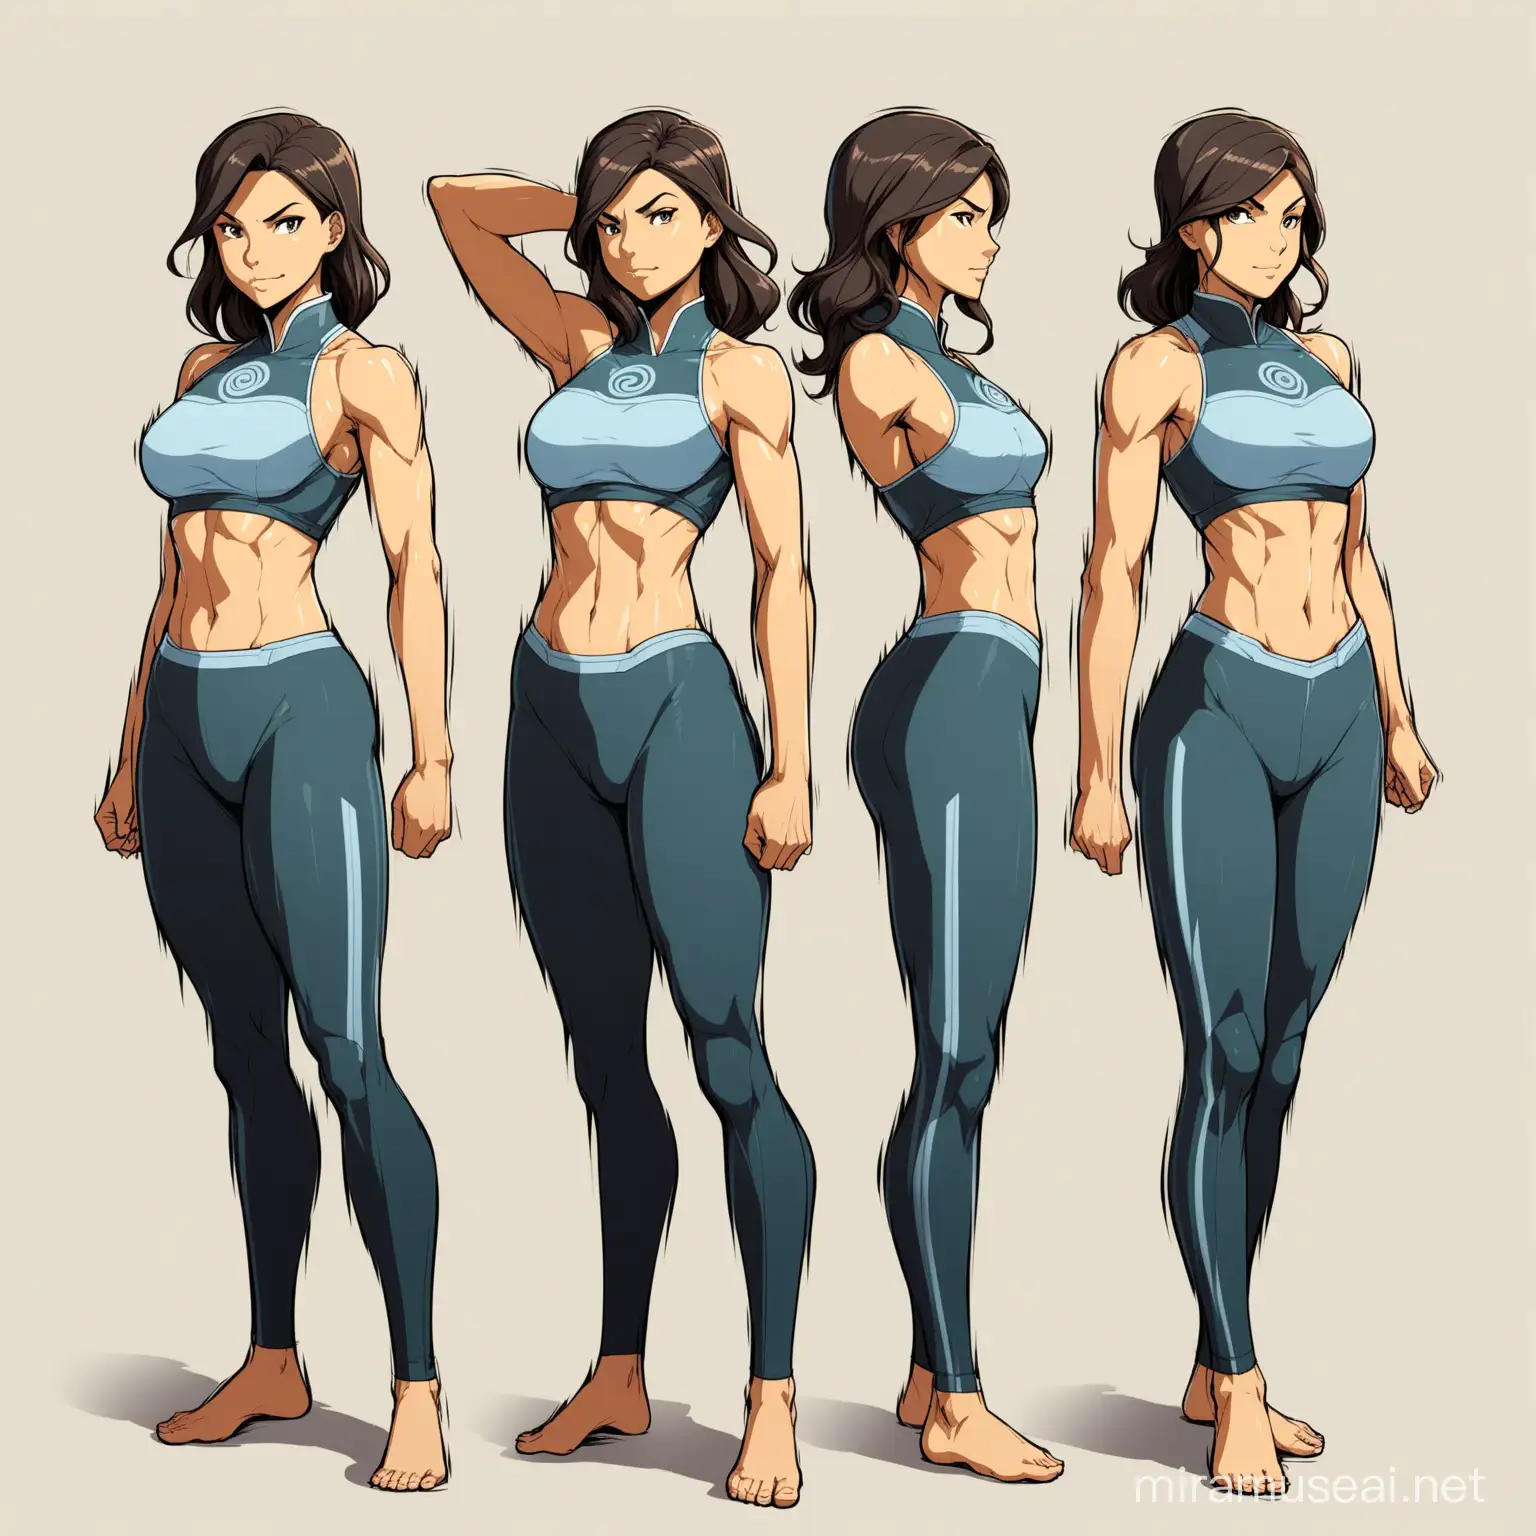 (A front view of one full body dynamic pose) a female figure, toned body, tall, beautiful, 4 different fem poses, in style of Legend of Korra 